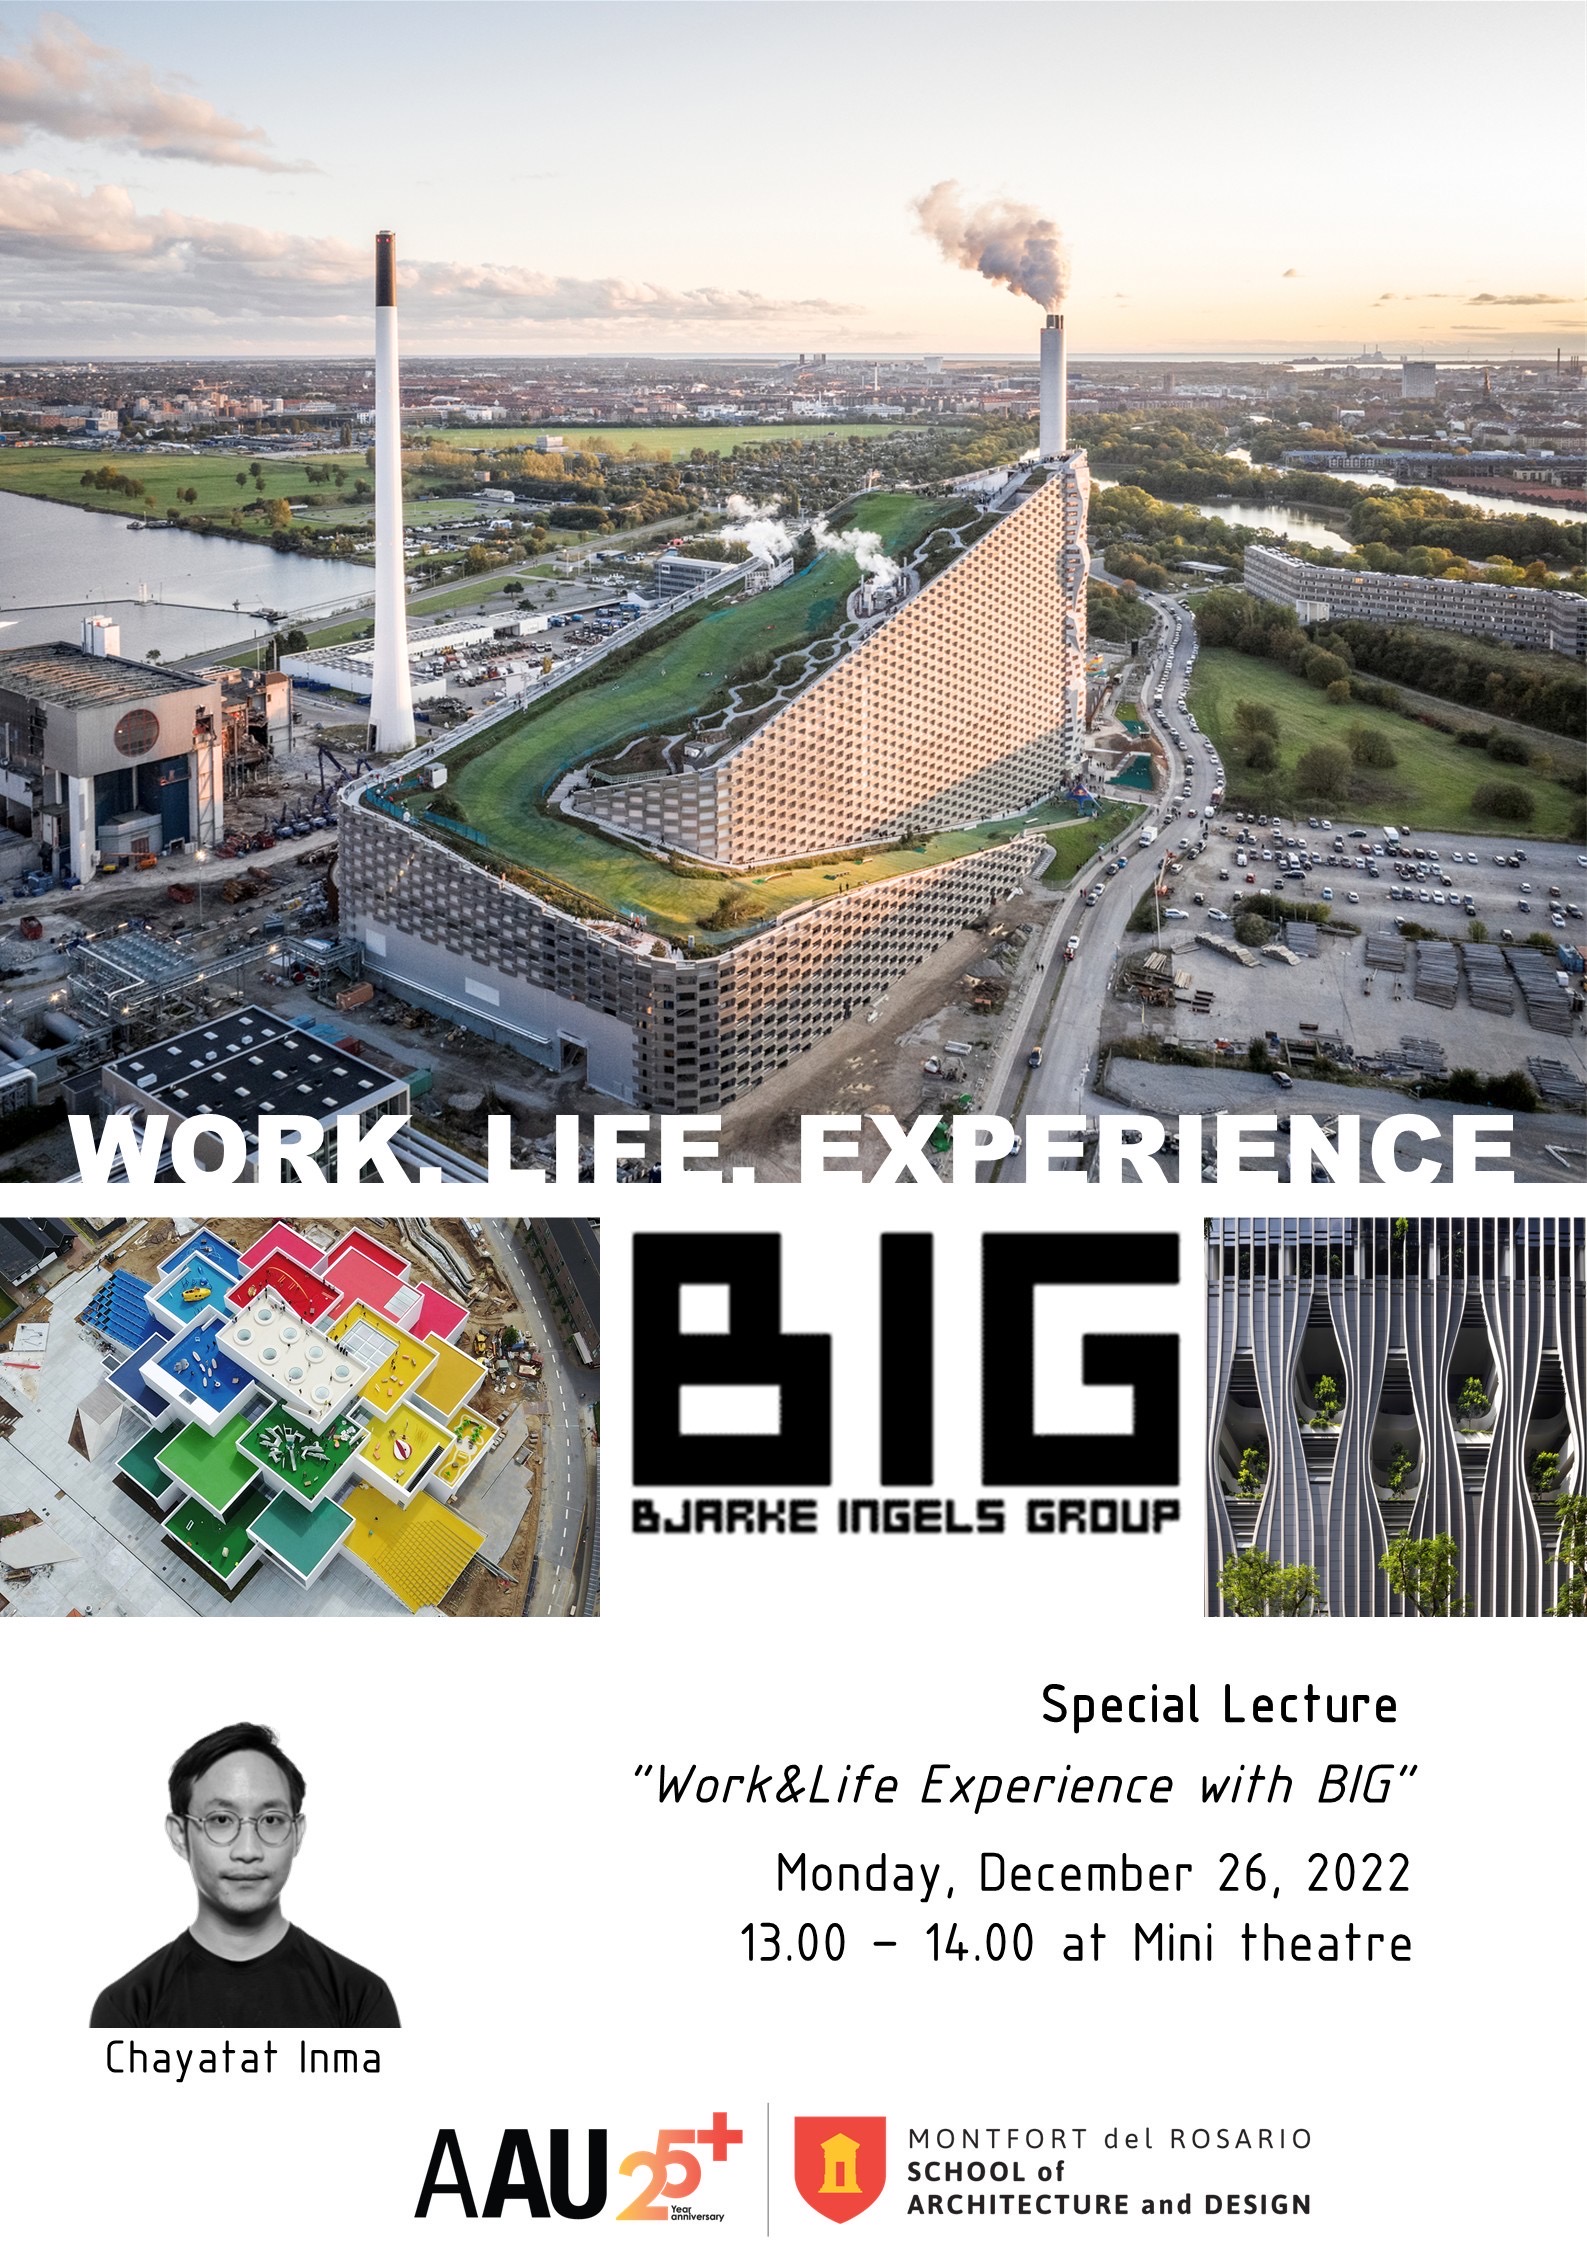 Special Lecture “Work&Life Experience with BIG